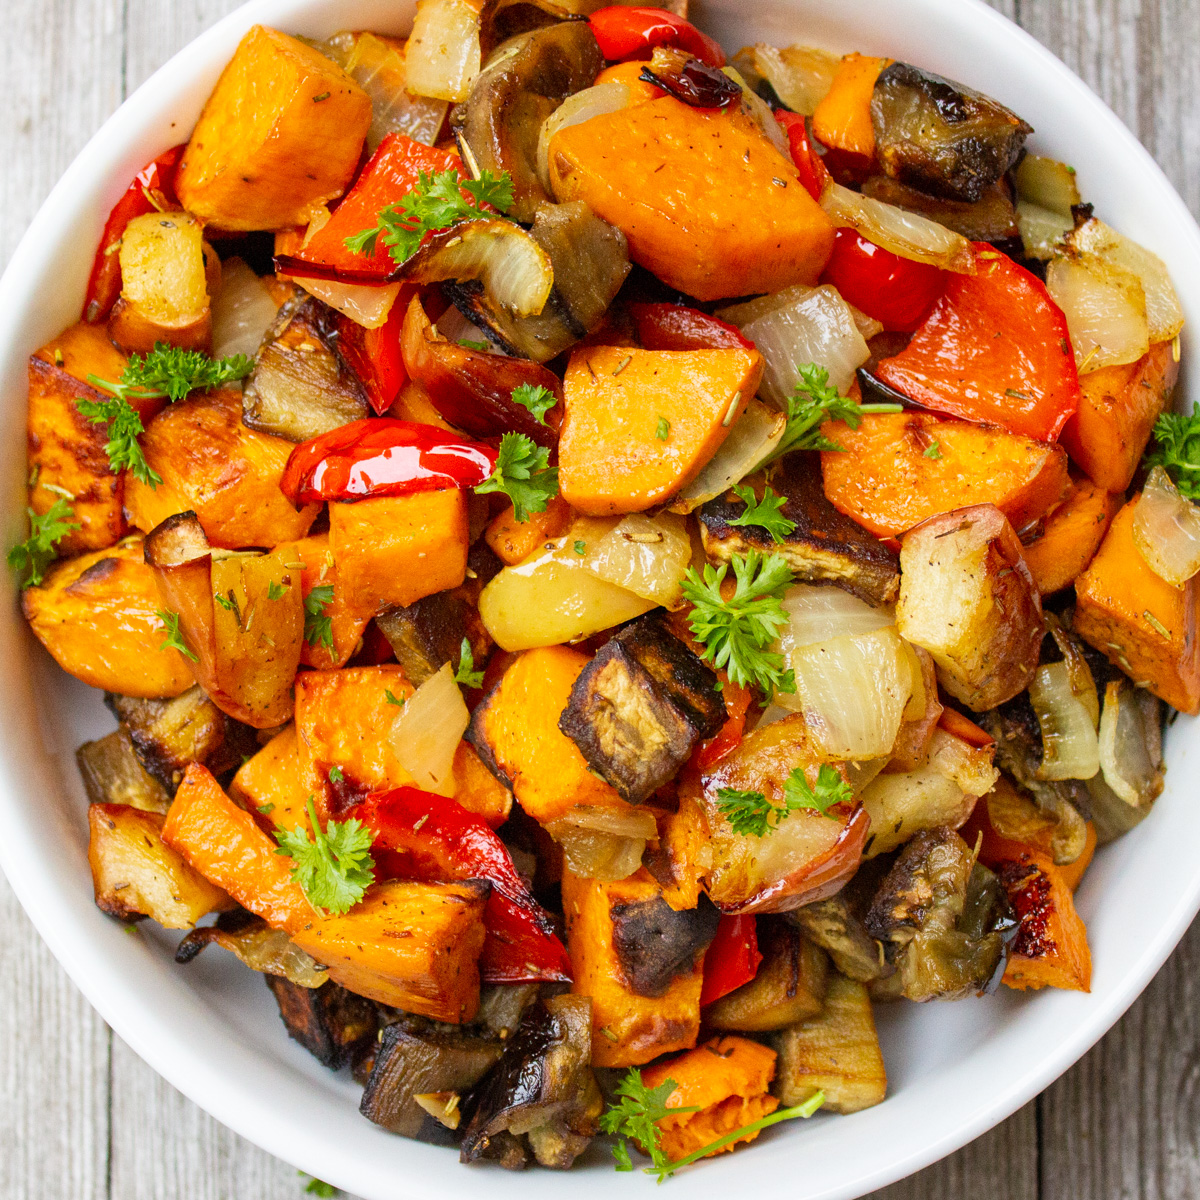 Oven Roasted Vegetables Recipe